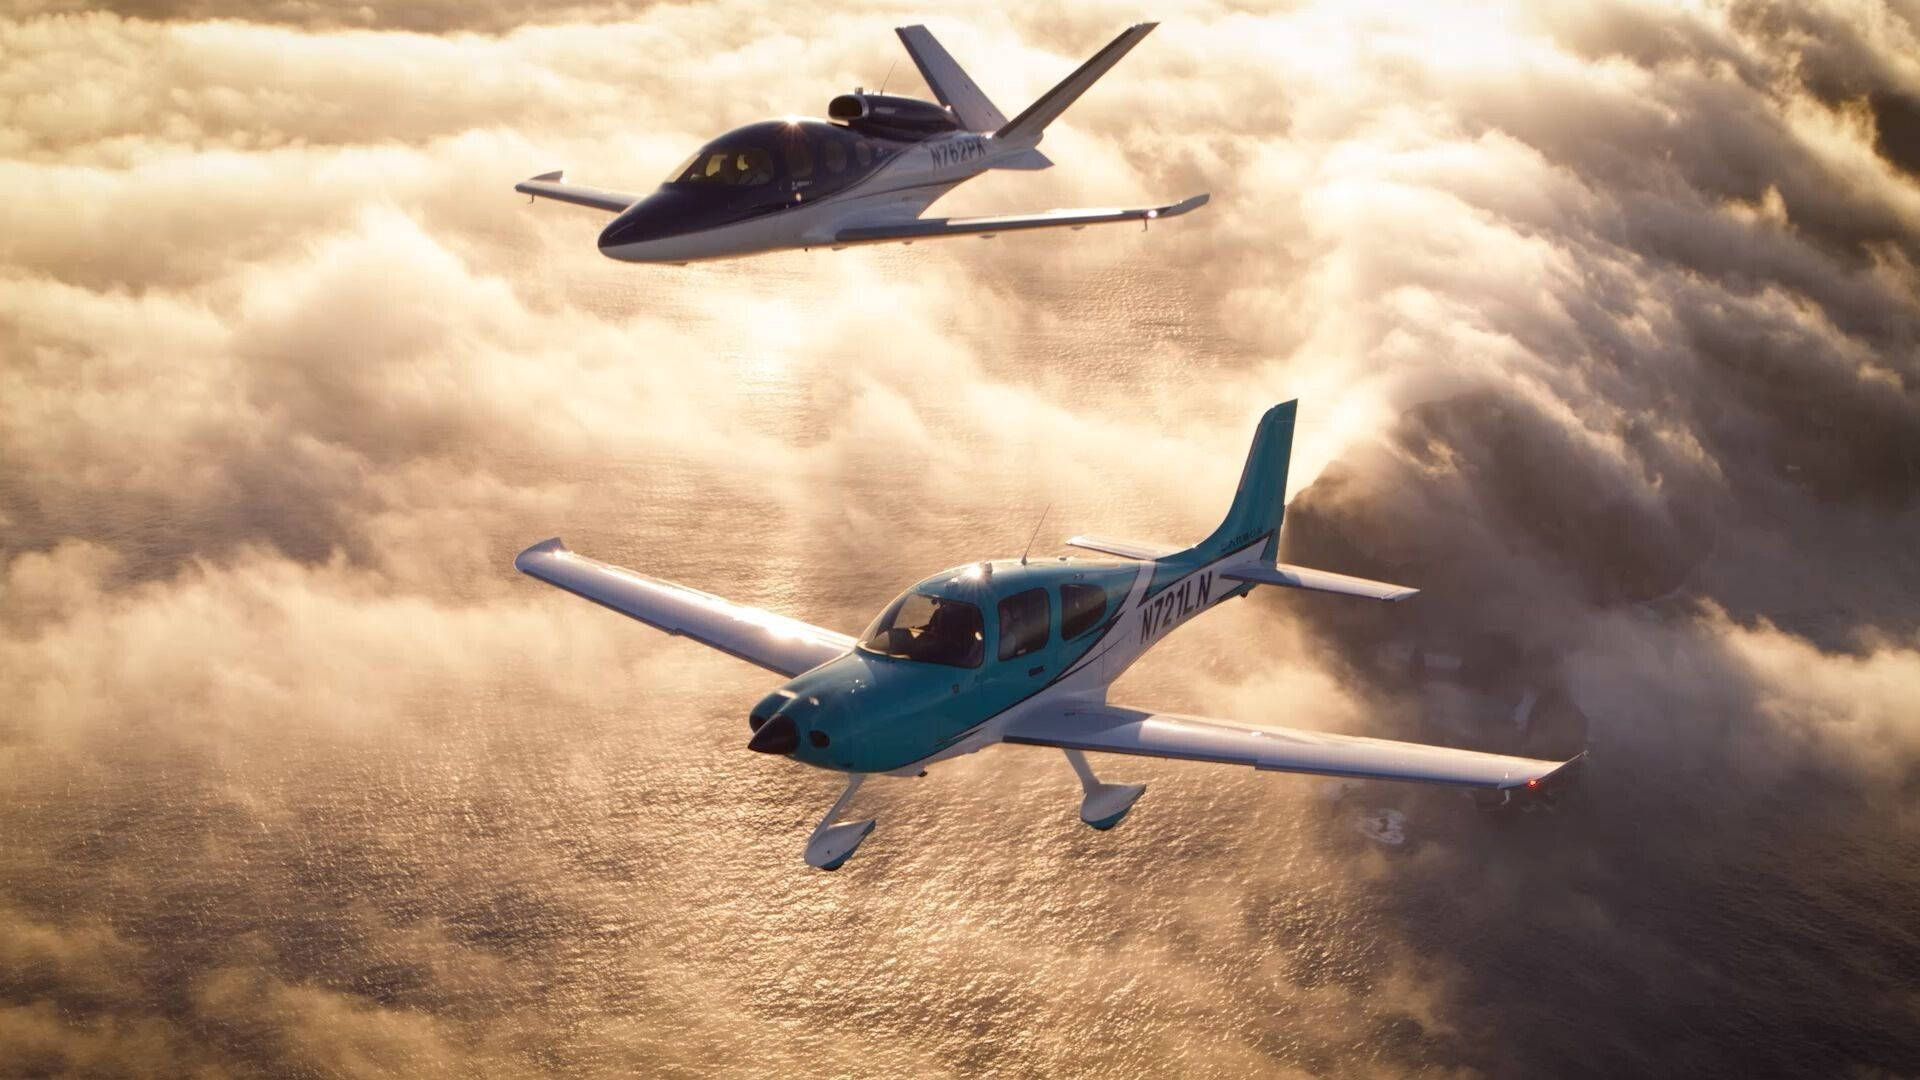 Small Planes In The Clouds Wallpaper